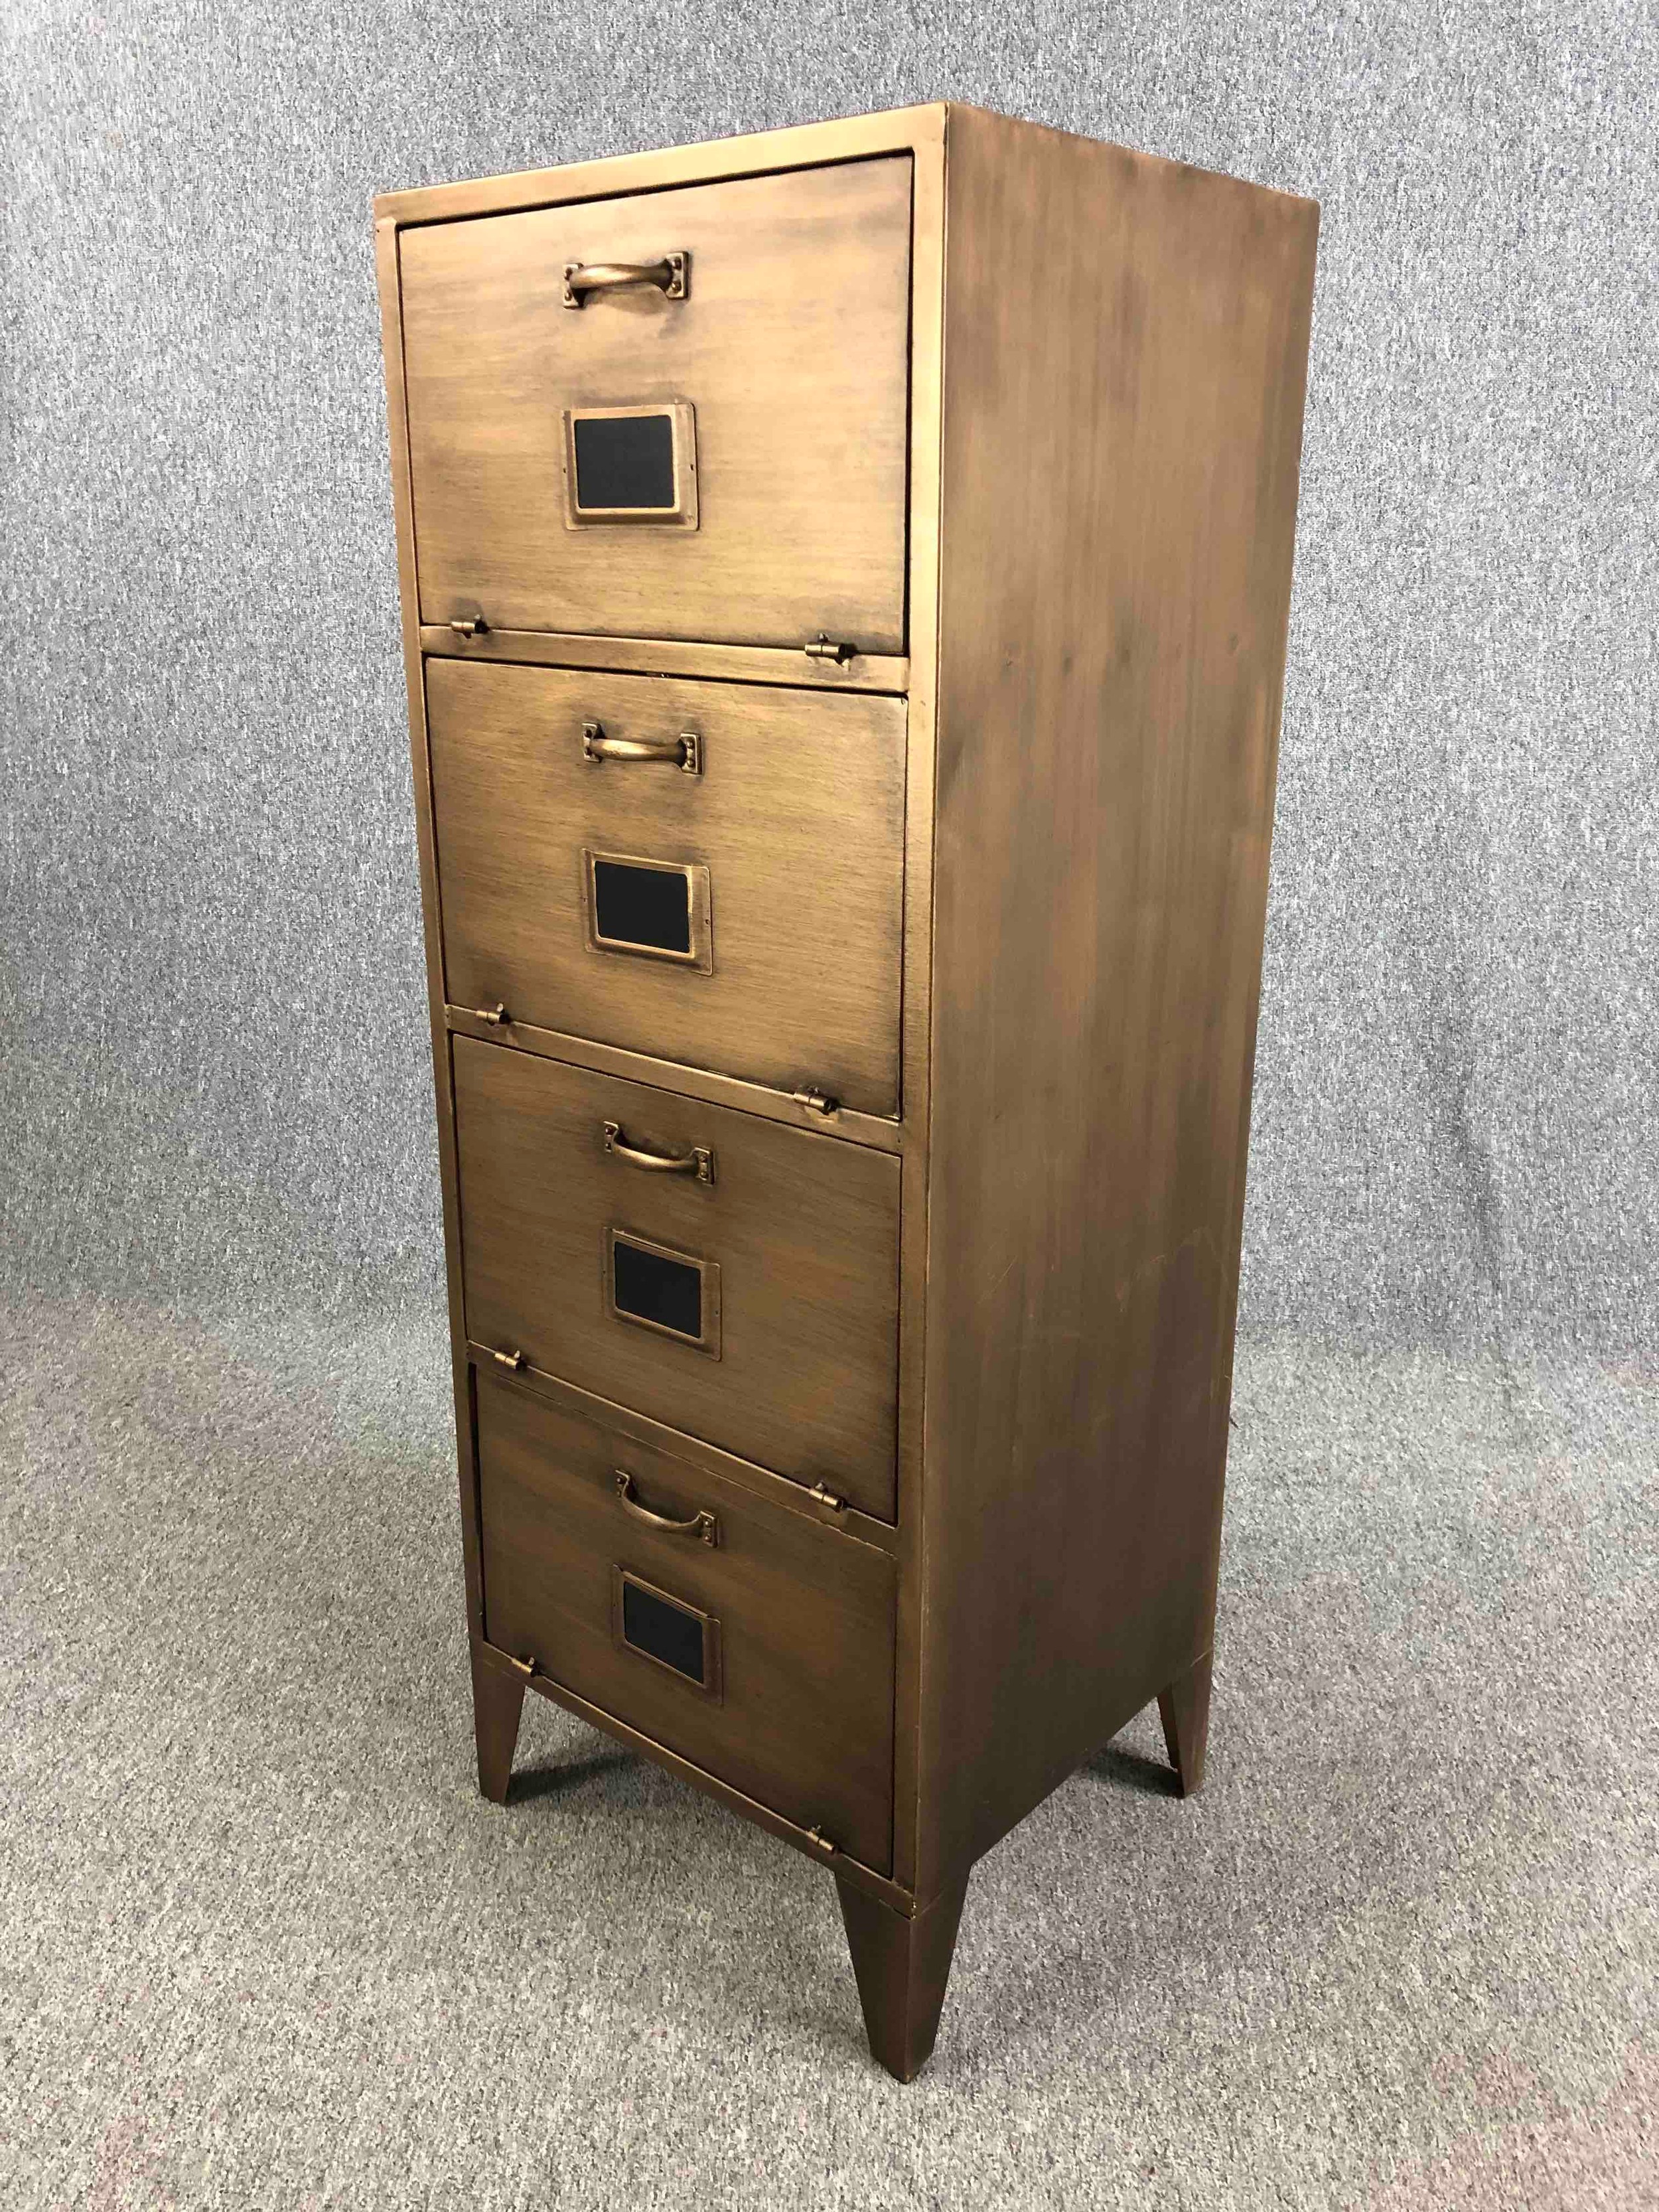 Filing cabinet, contemporary metal in vintage style with fall front sections. H.101 W.45 D.40cm. - Image 3 of 4